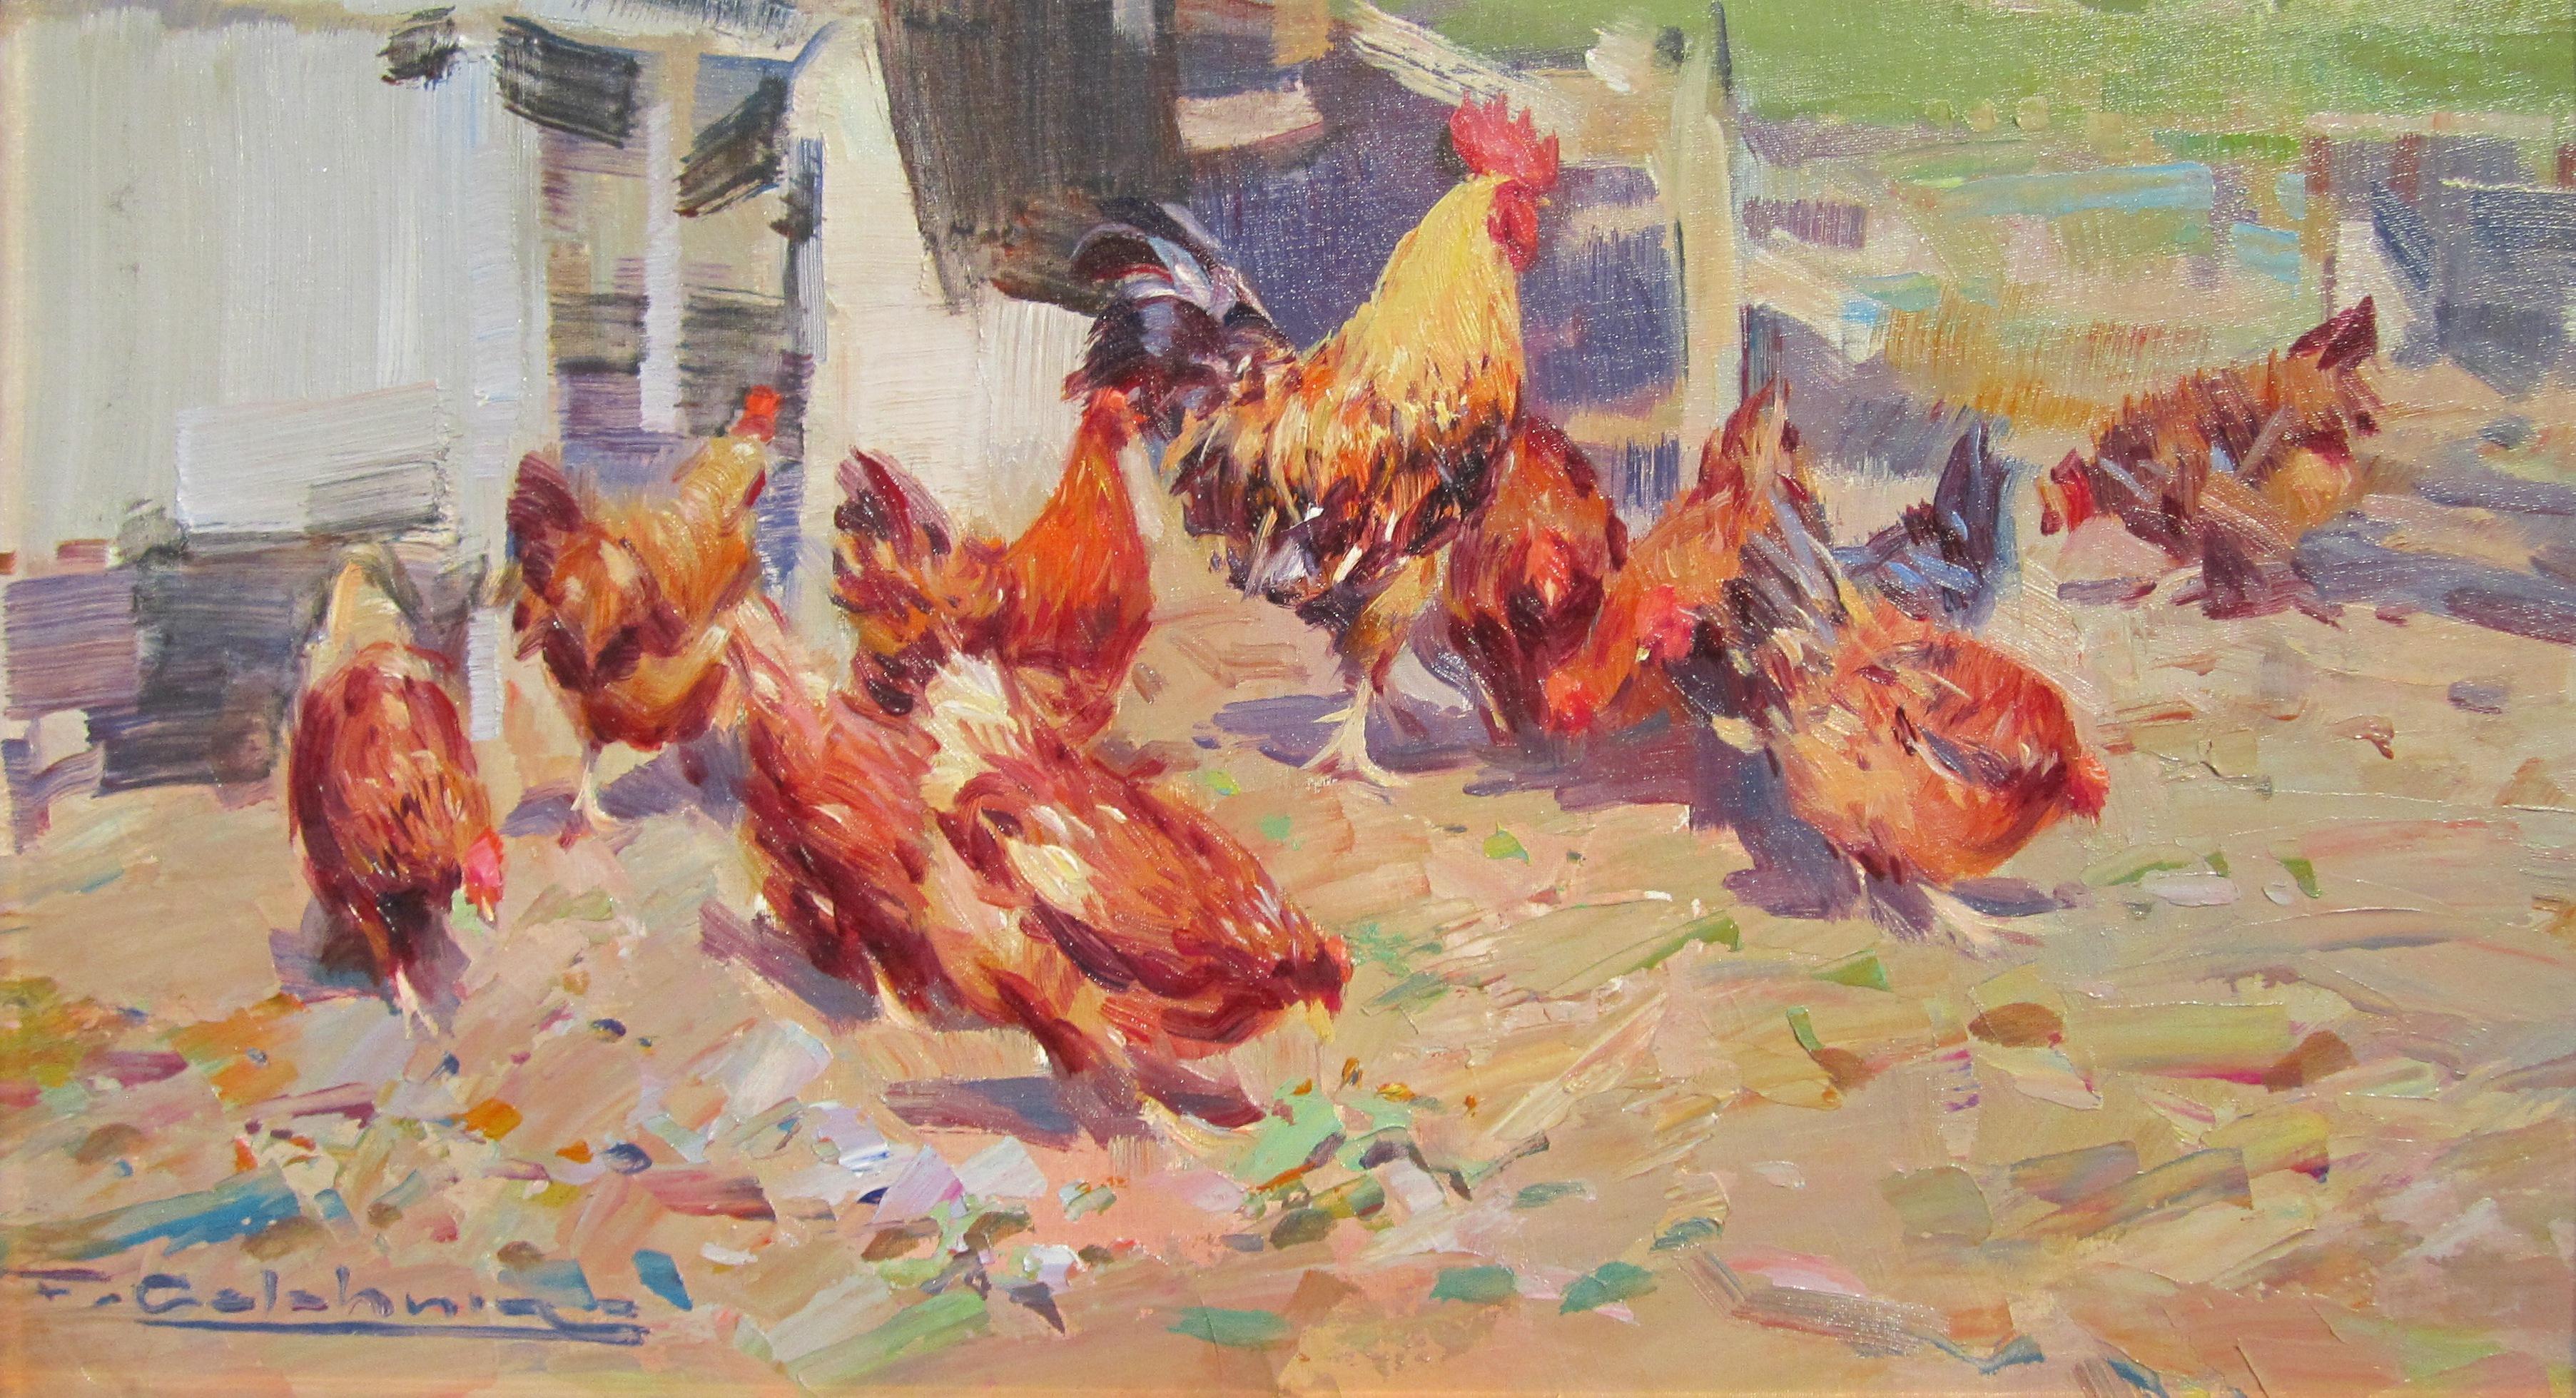 'Las Gallinas' Contemporary colourful painting of chickens and cockerel - Painting by Francisco Calabuig